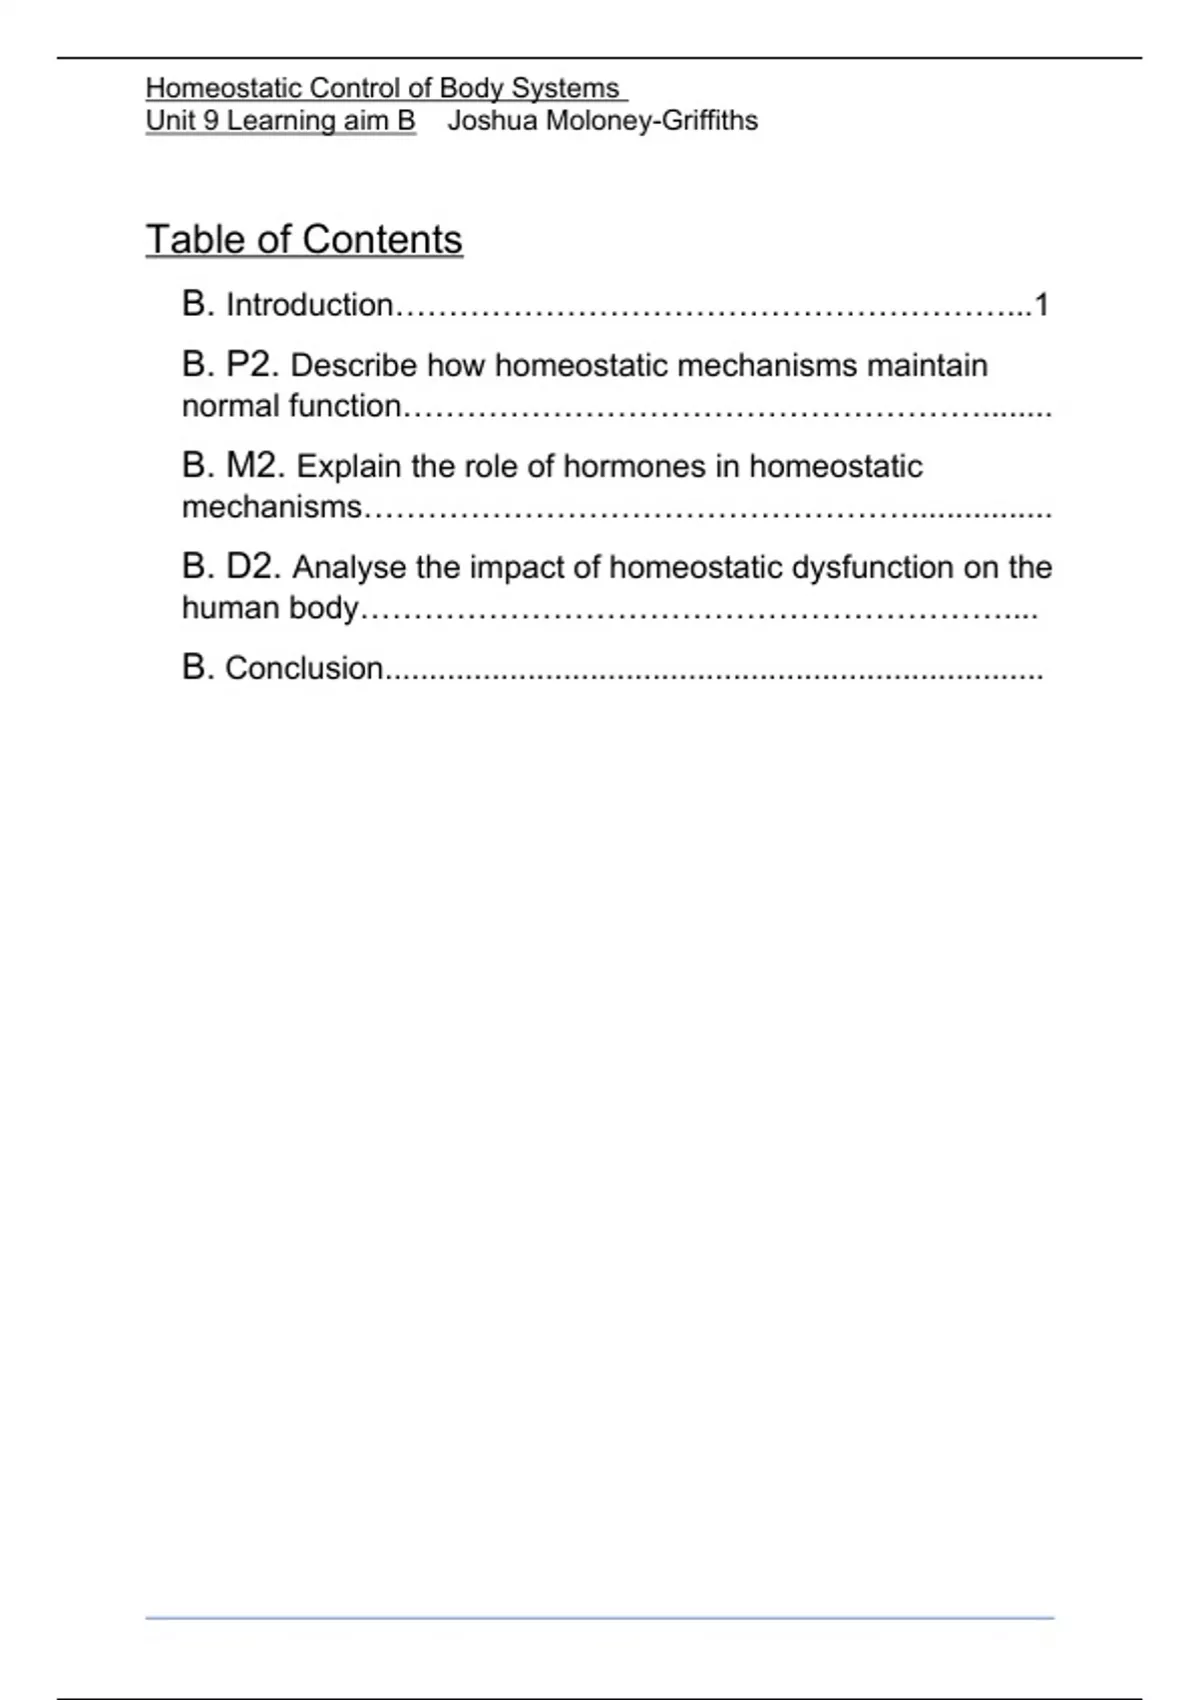 btec applied science unit 9 assignment b